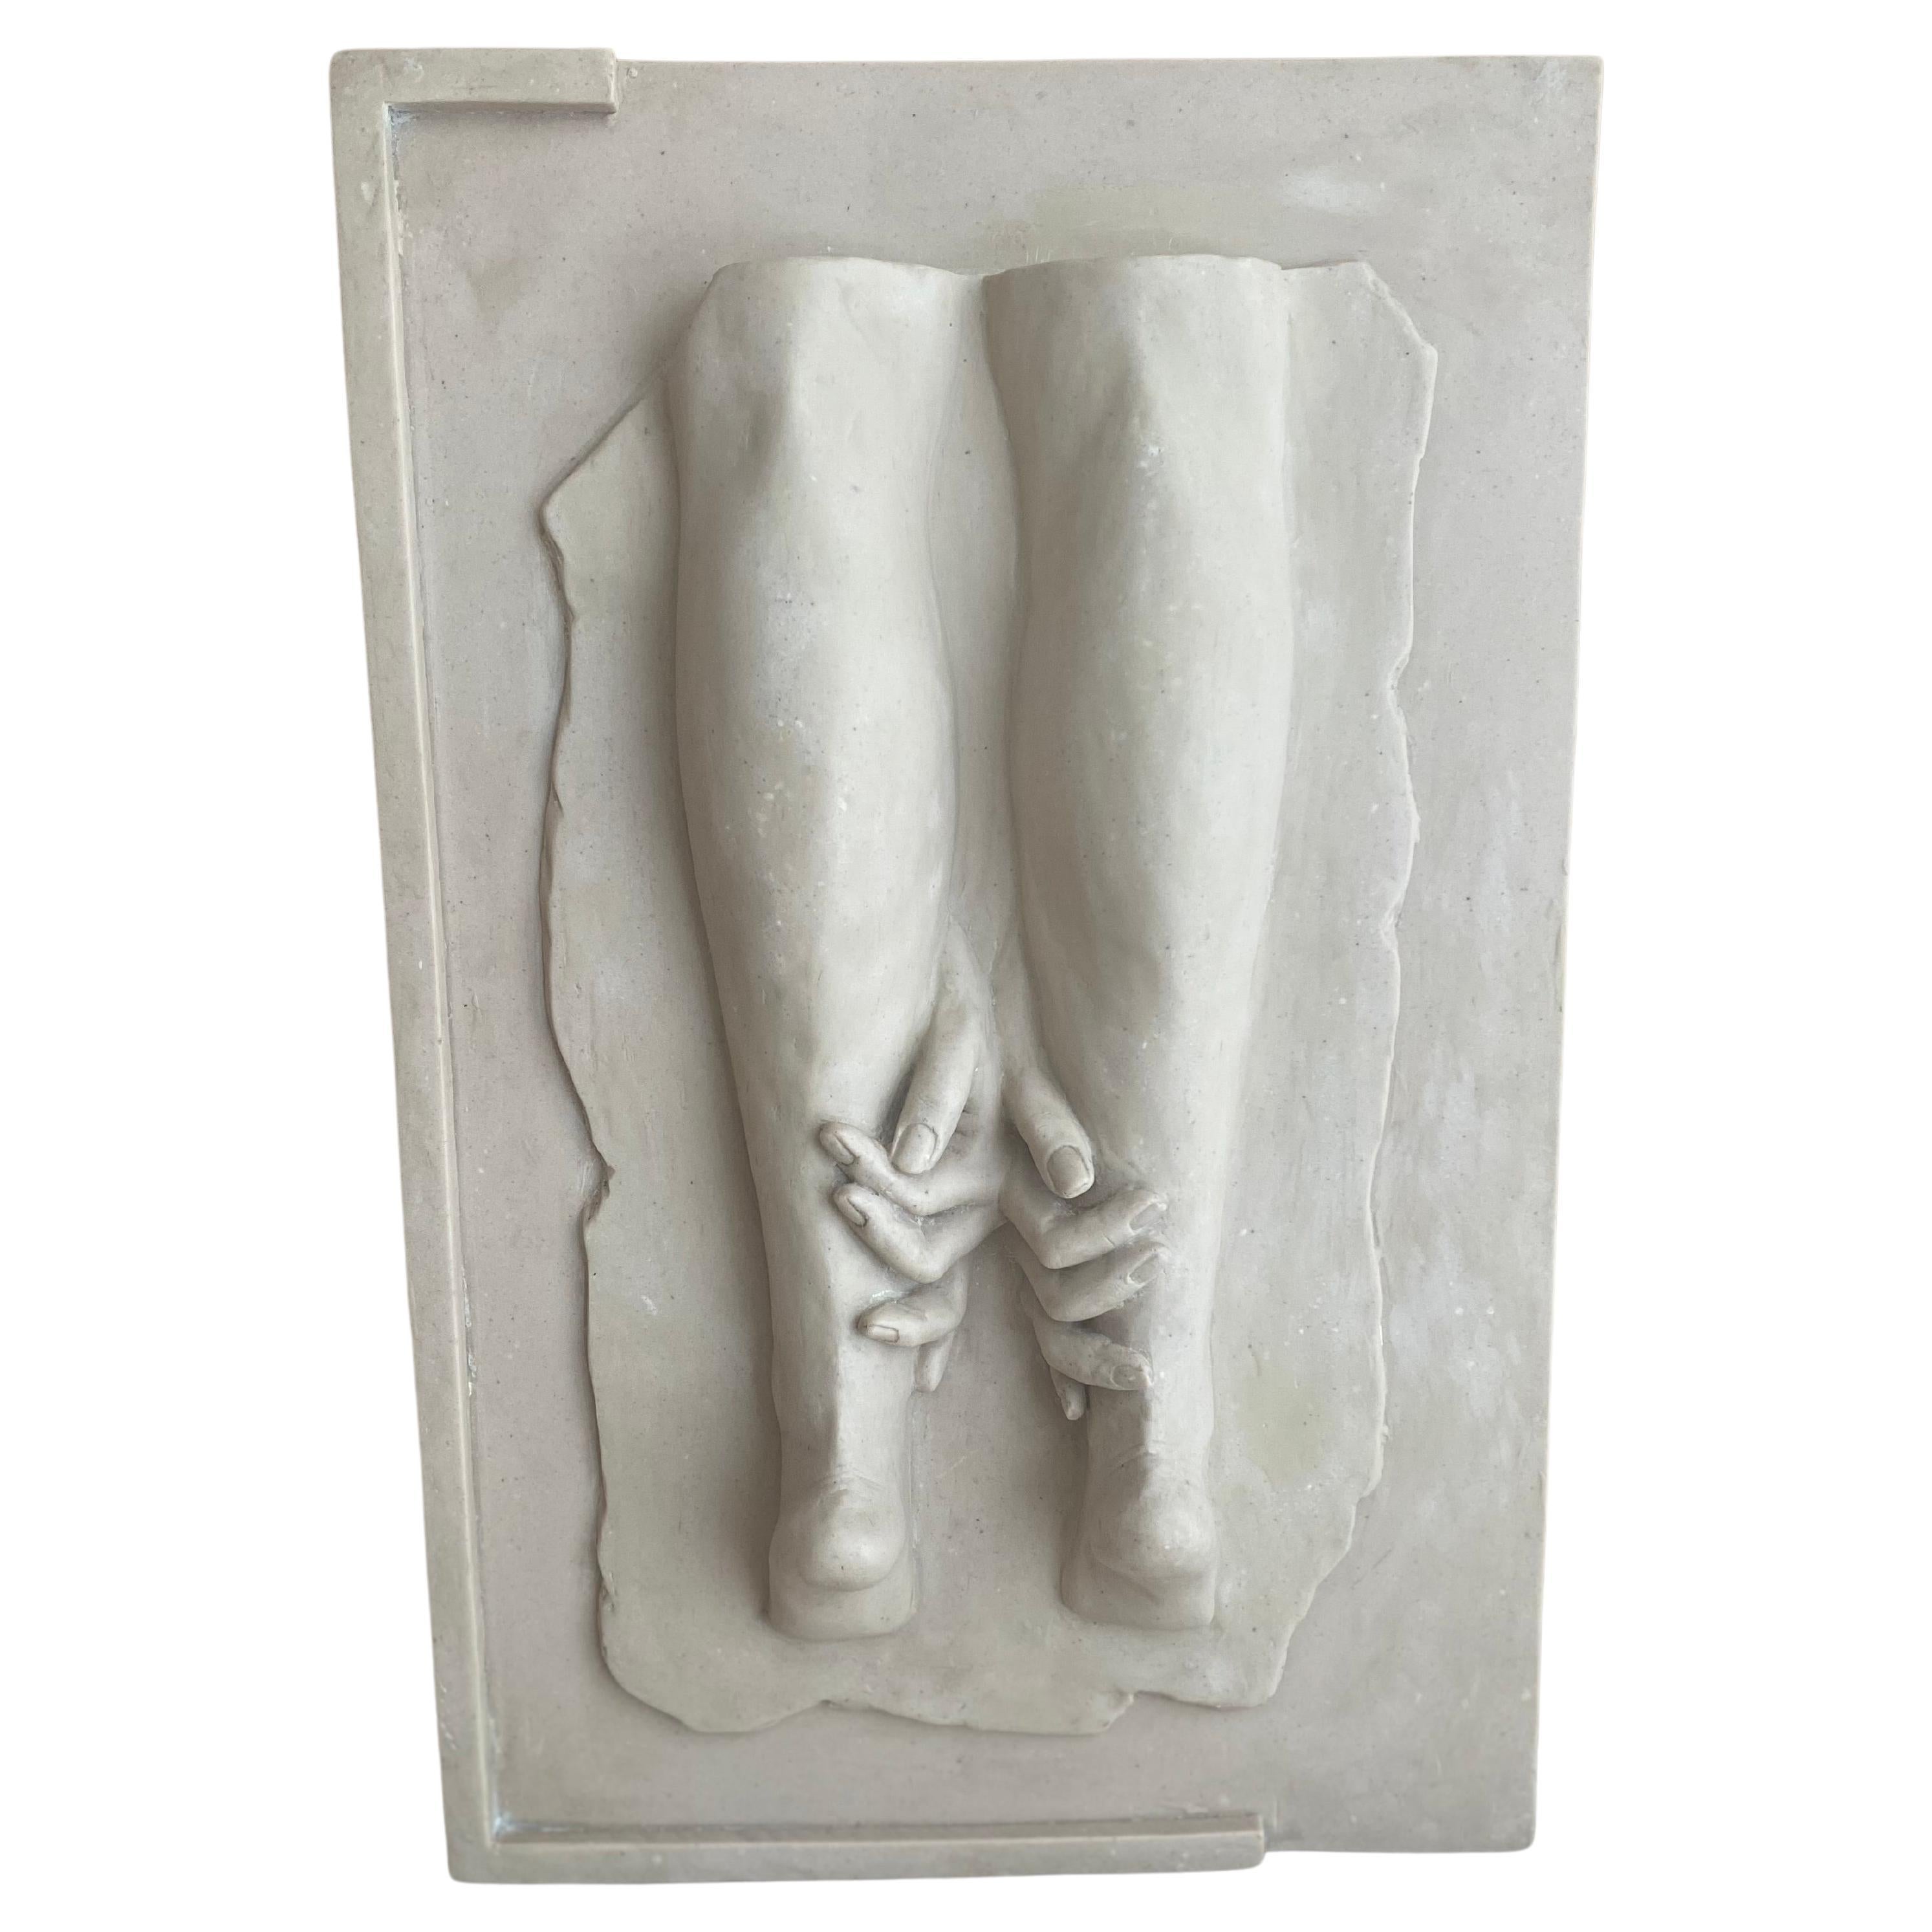 Marcela Cure Female's Legs Wall Art Sculpture Resin and Stone - Number 21 For Sale